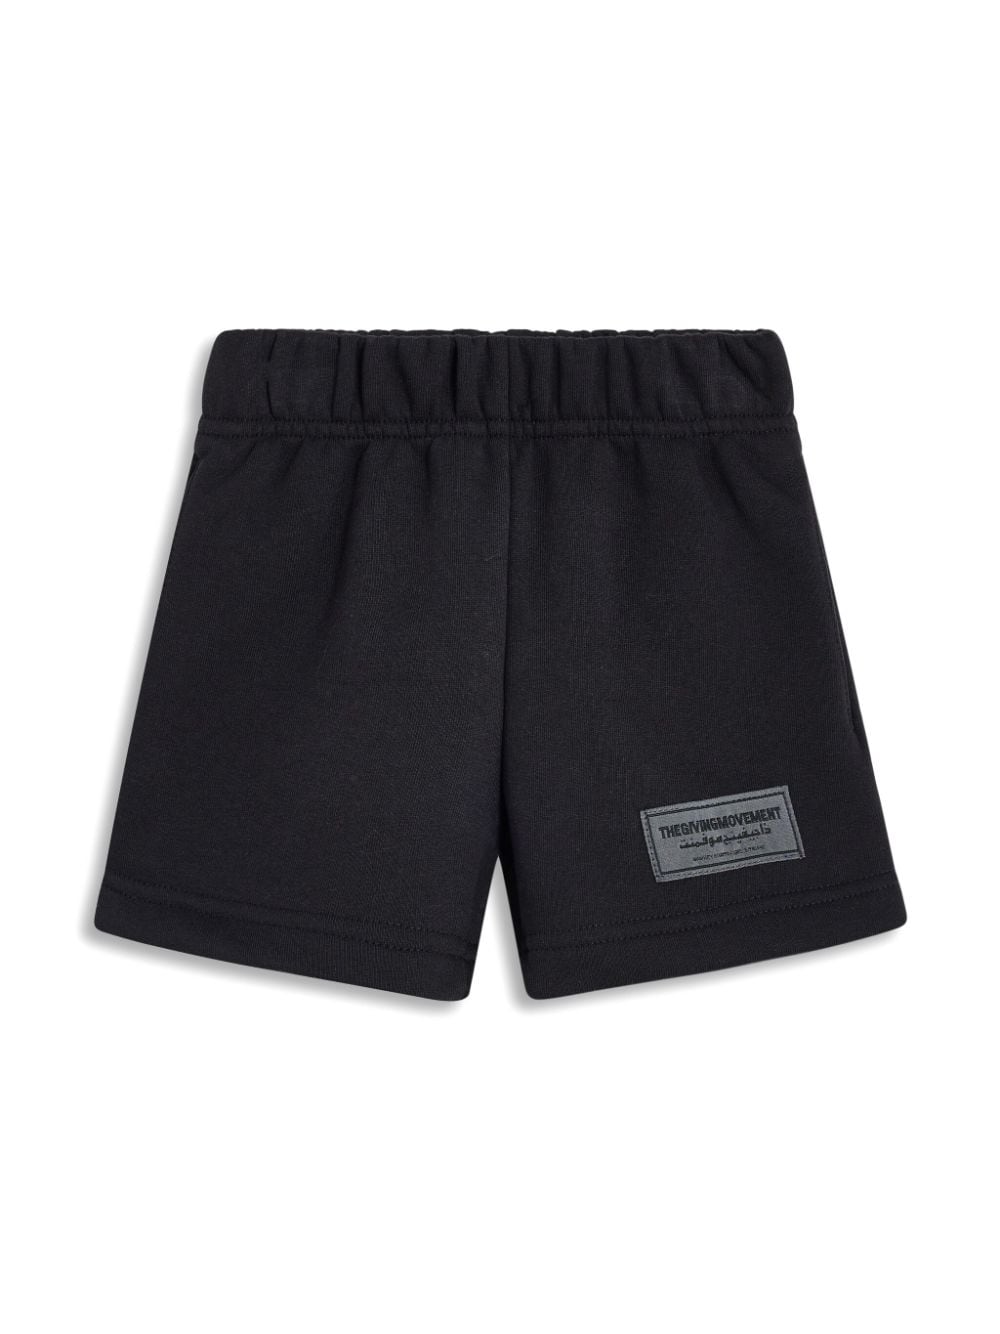 THE GIVING MOVEMENT cotton-blend track shorts - Black von THE GIVING MOVEMENT